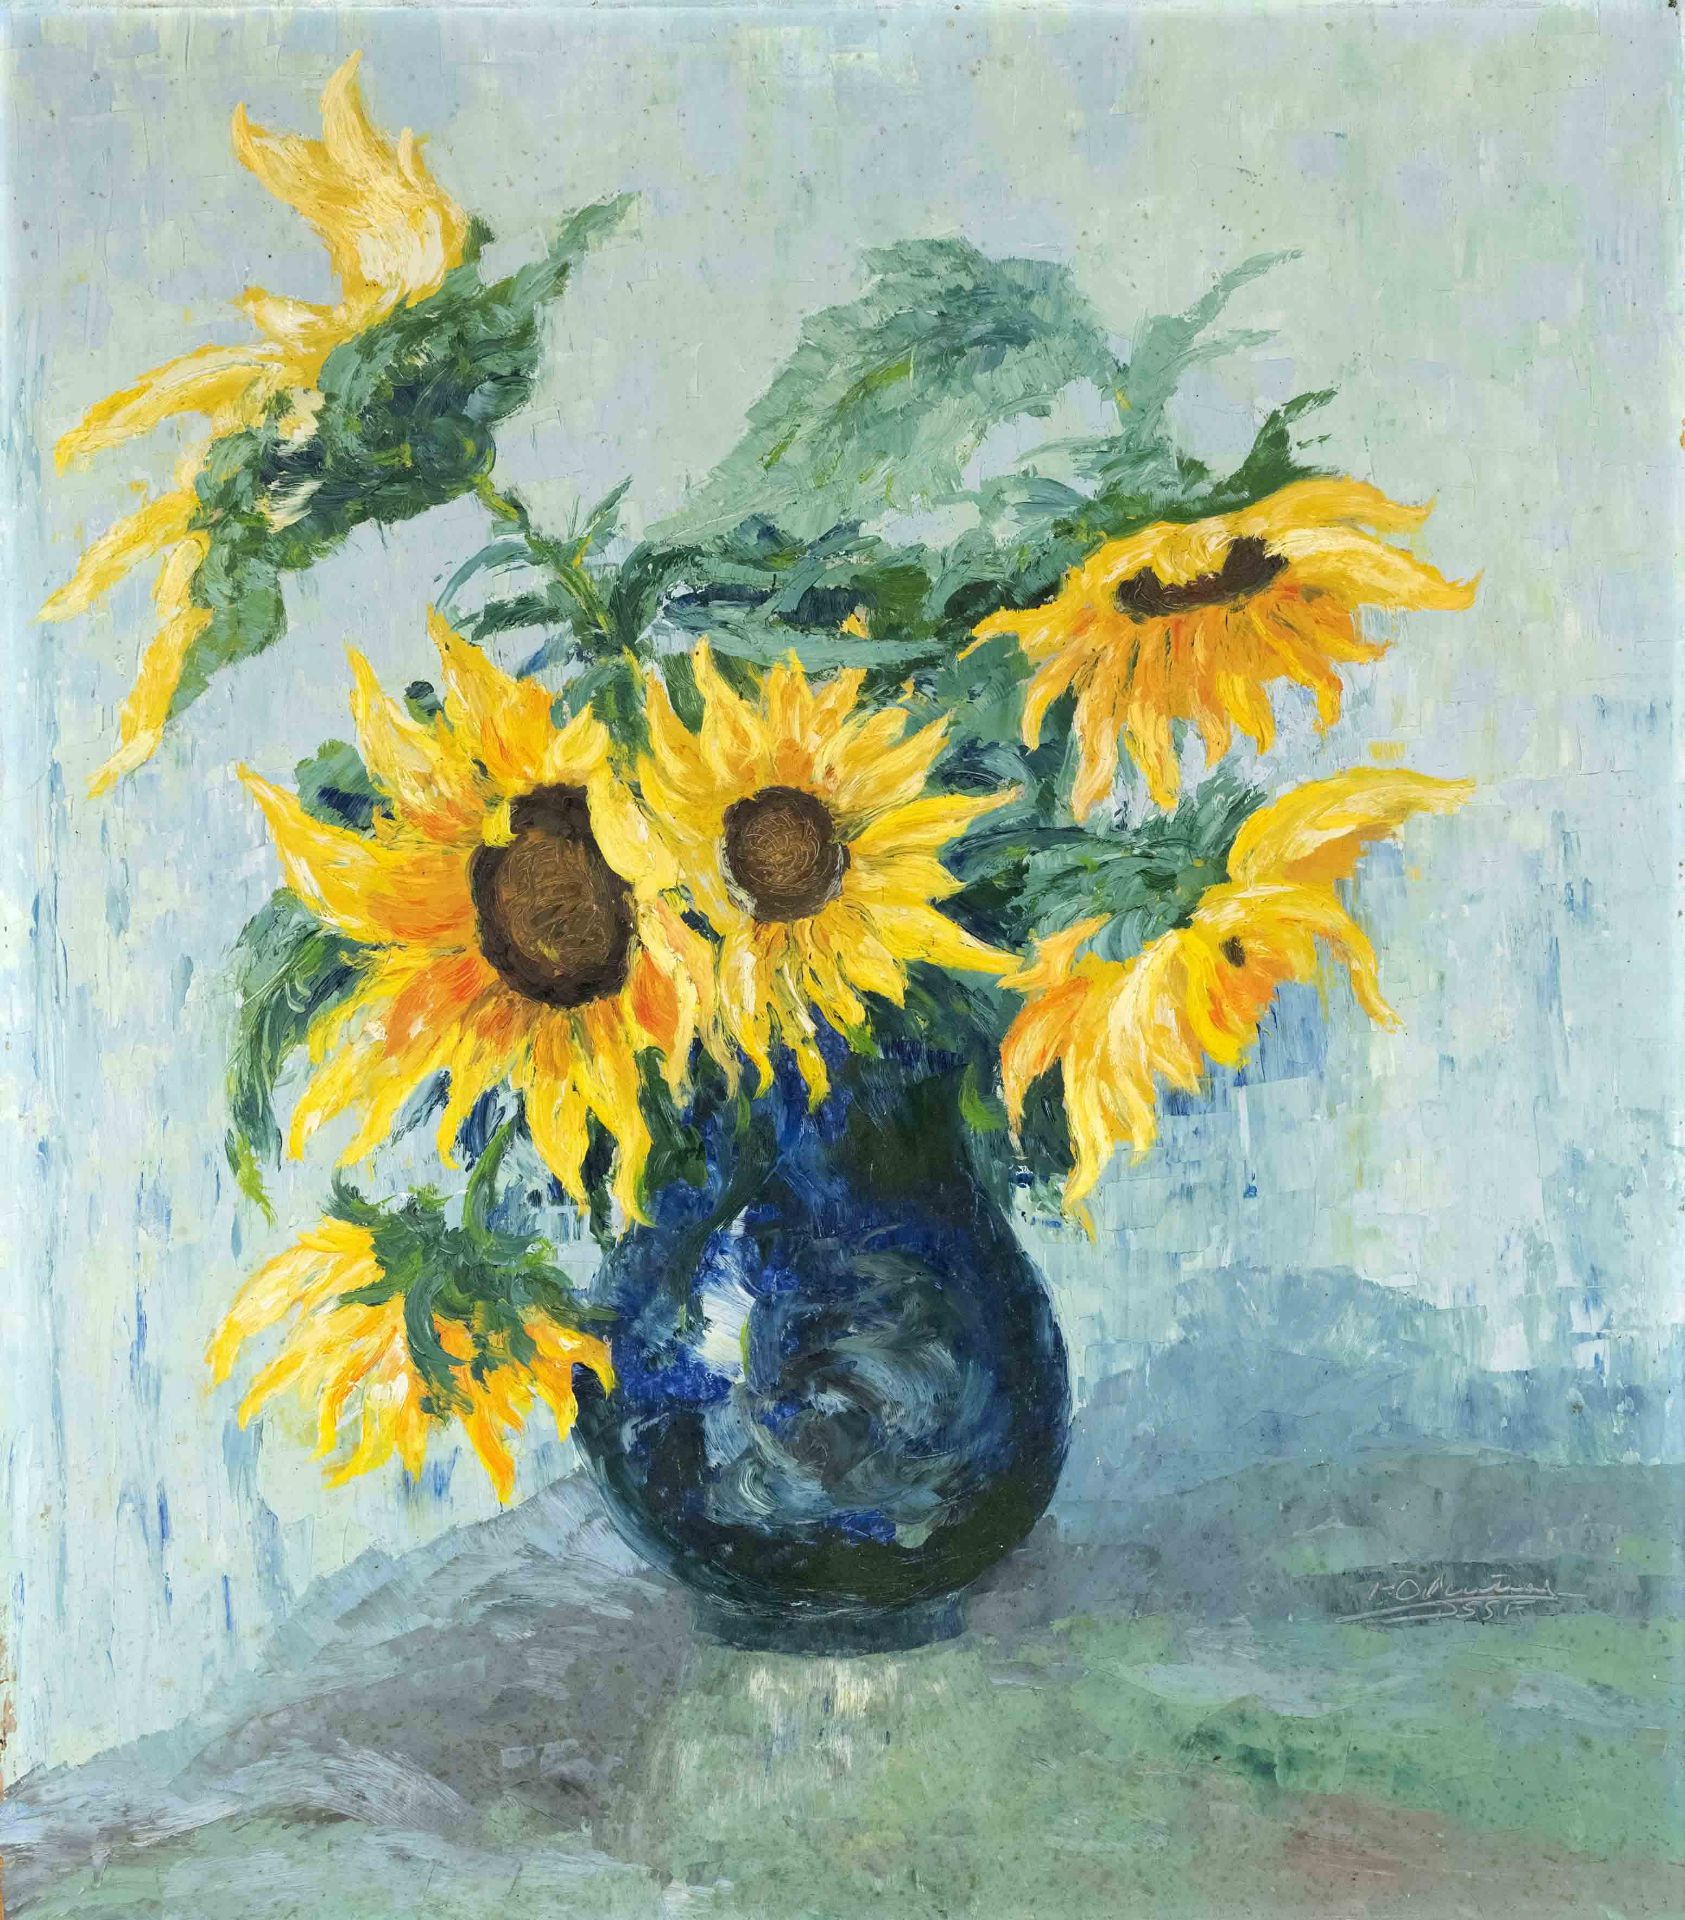 Heinrich Odenthal (1897-1963), Still Life with Sunflowers, oil on hardboard, signed and dated